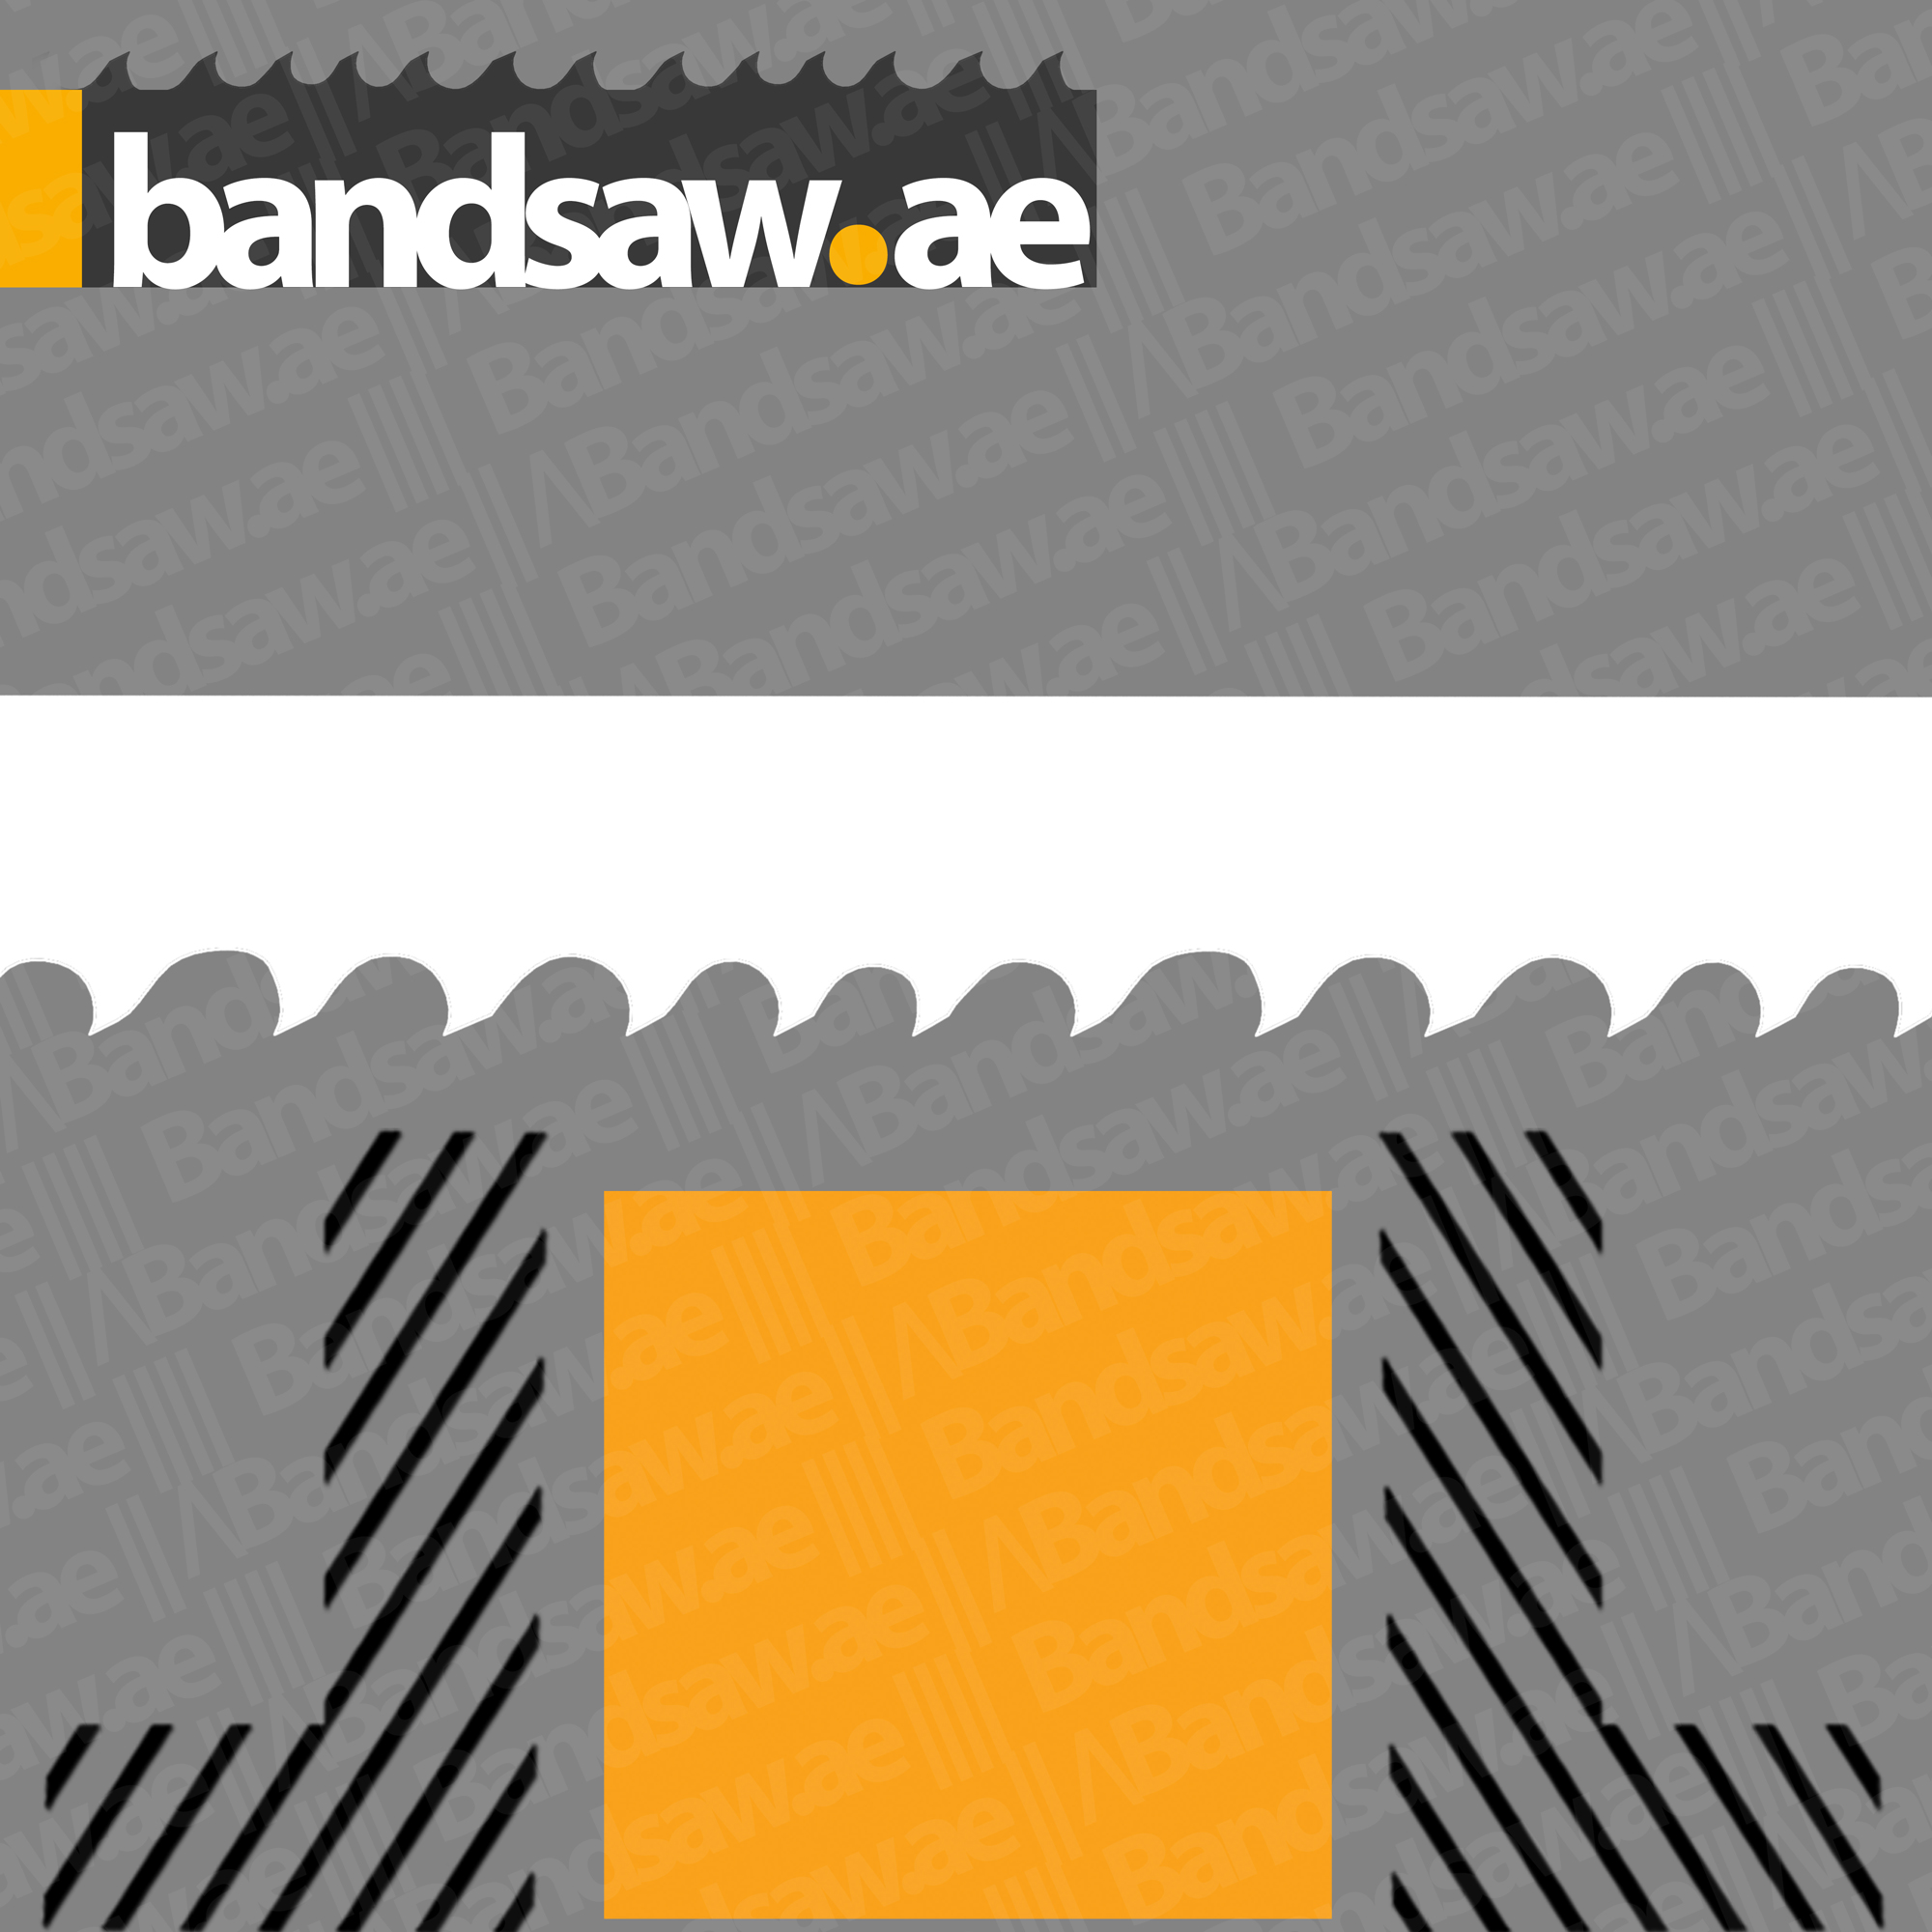 Metal Cutting Bandsaw Blades, models, rake angles, teeth gullet designs, M42 High-Speed Steel, heat durability, tooth hardness Rc 67-69, strength, longevity, Qom Bandsaw Blades, re-engineered relief angles, duplex tooth design, positive rake, exotic materials, precision, efficiency, ground teeth, heat resistance, wear resistance,SUPPLIER, wide range of applications, tool steel, high-speed steel, stainless steels, hydraulic feed control, non-ferrous metals, coil strip sizes, TFI Co., complete solution, coolant liquid, bandsaw machines, specialized food bandsaw blades.